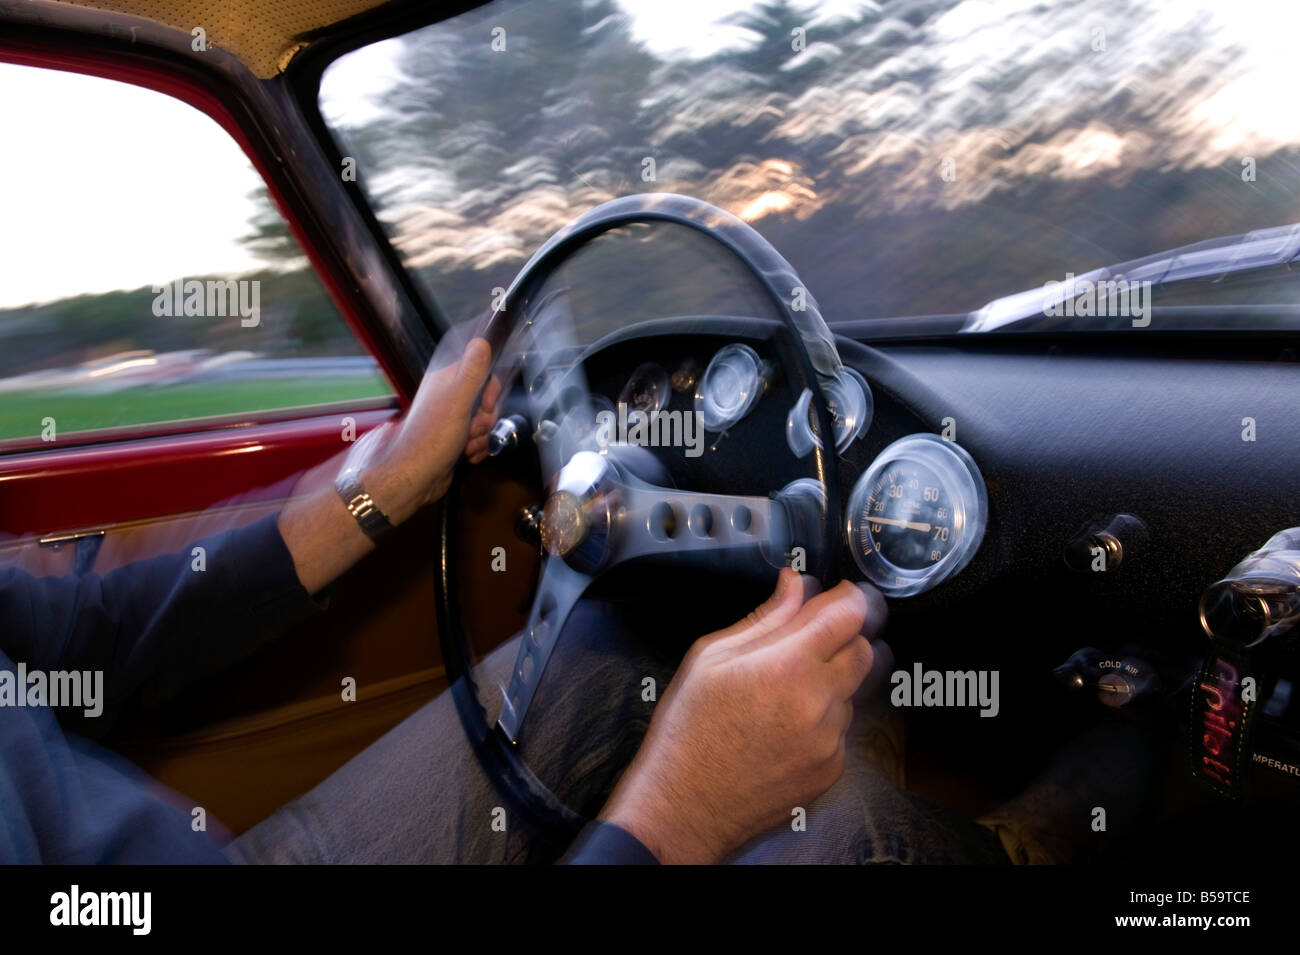 Driving a classic car at speed Stock Photo